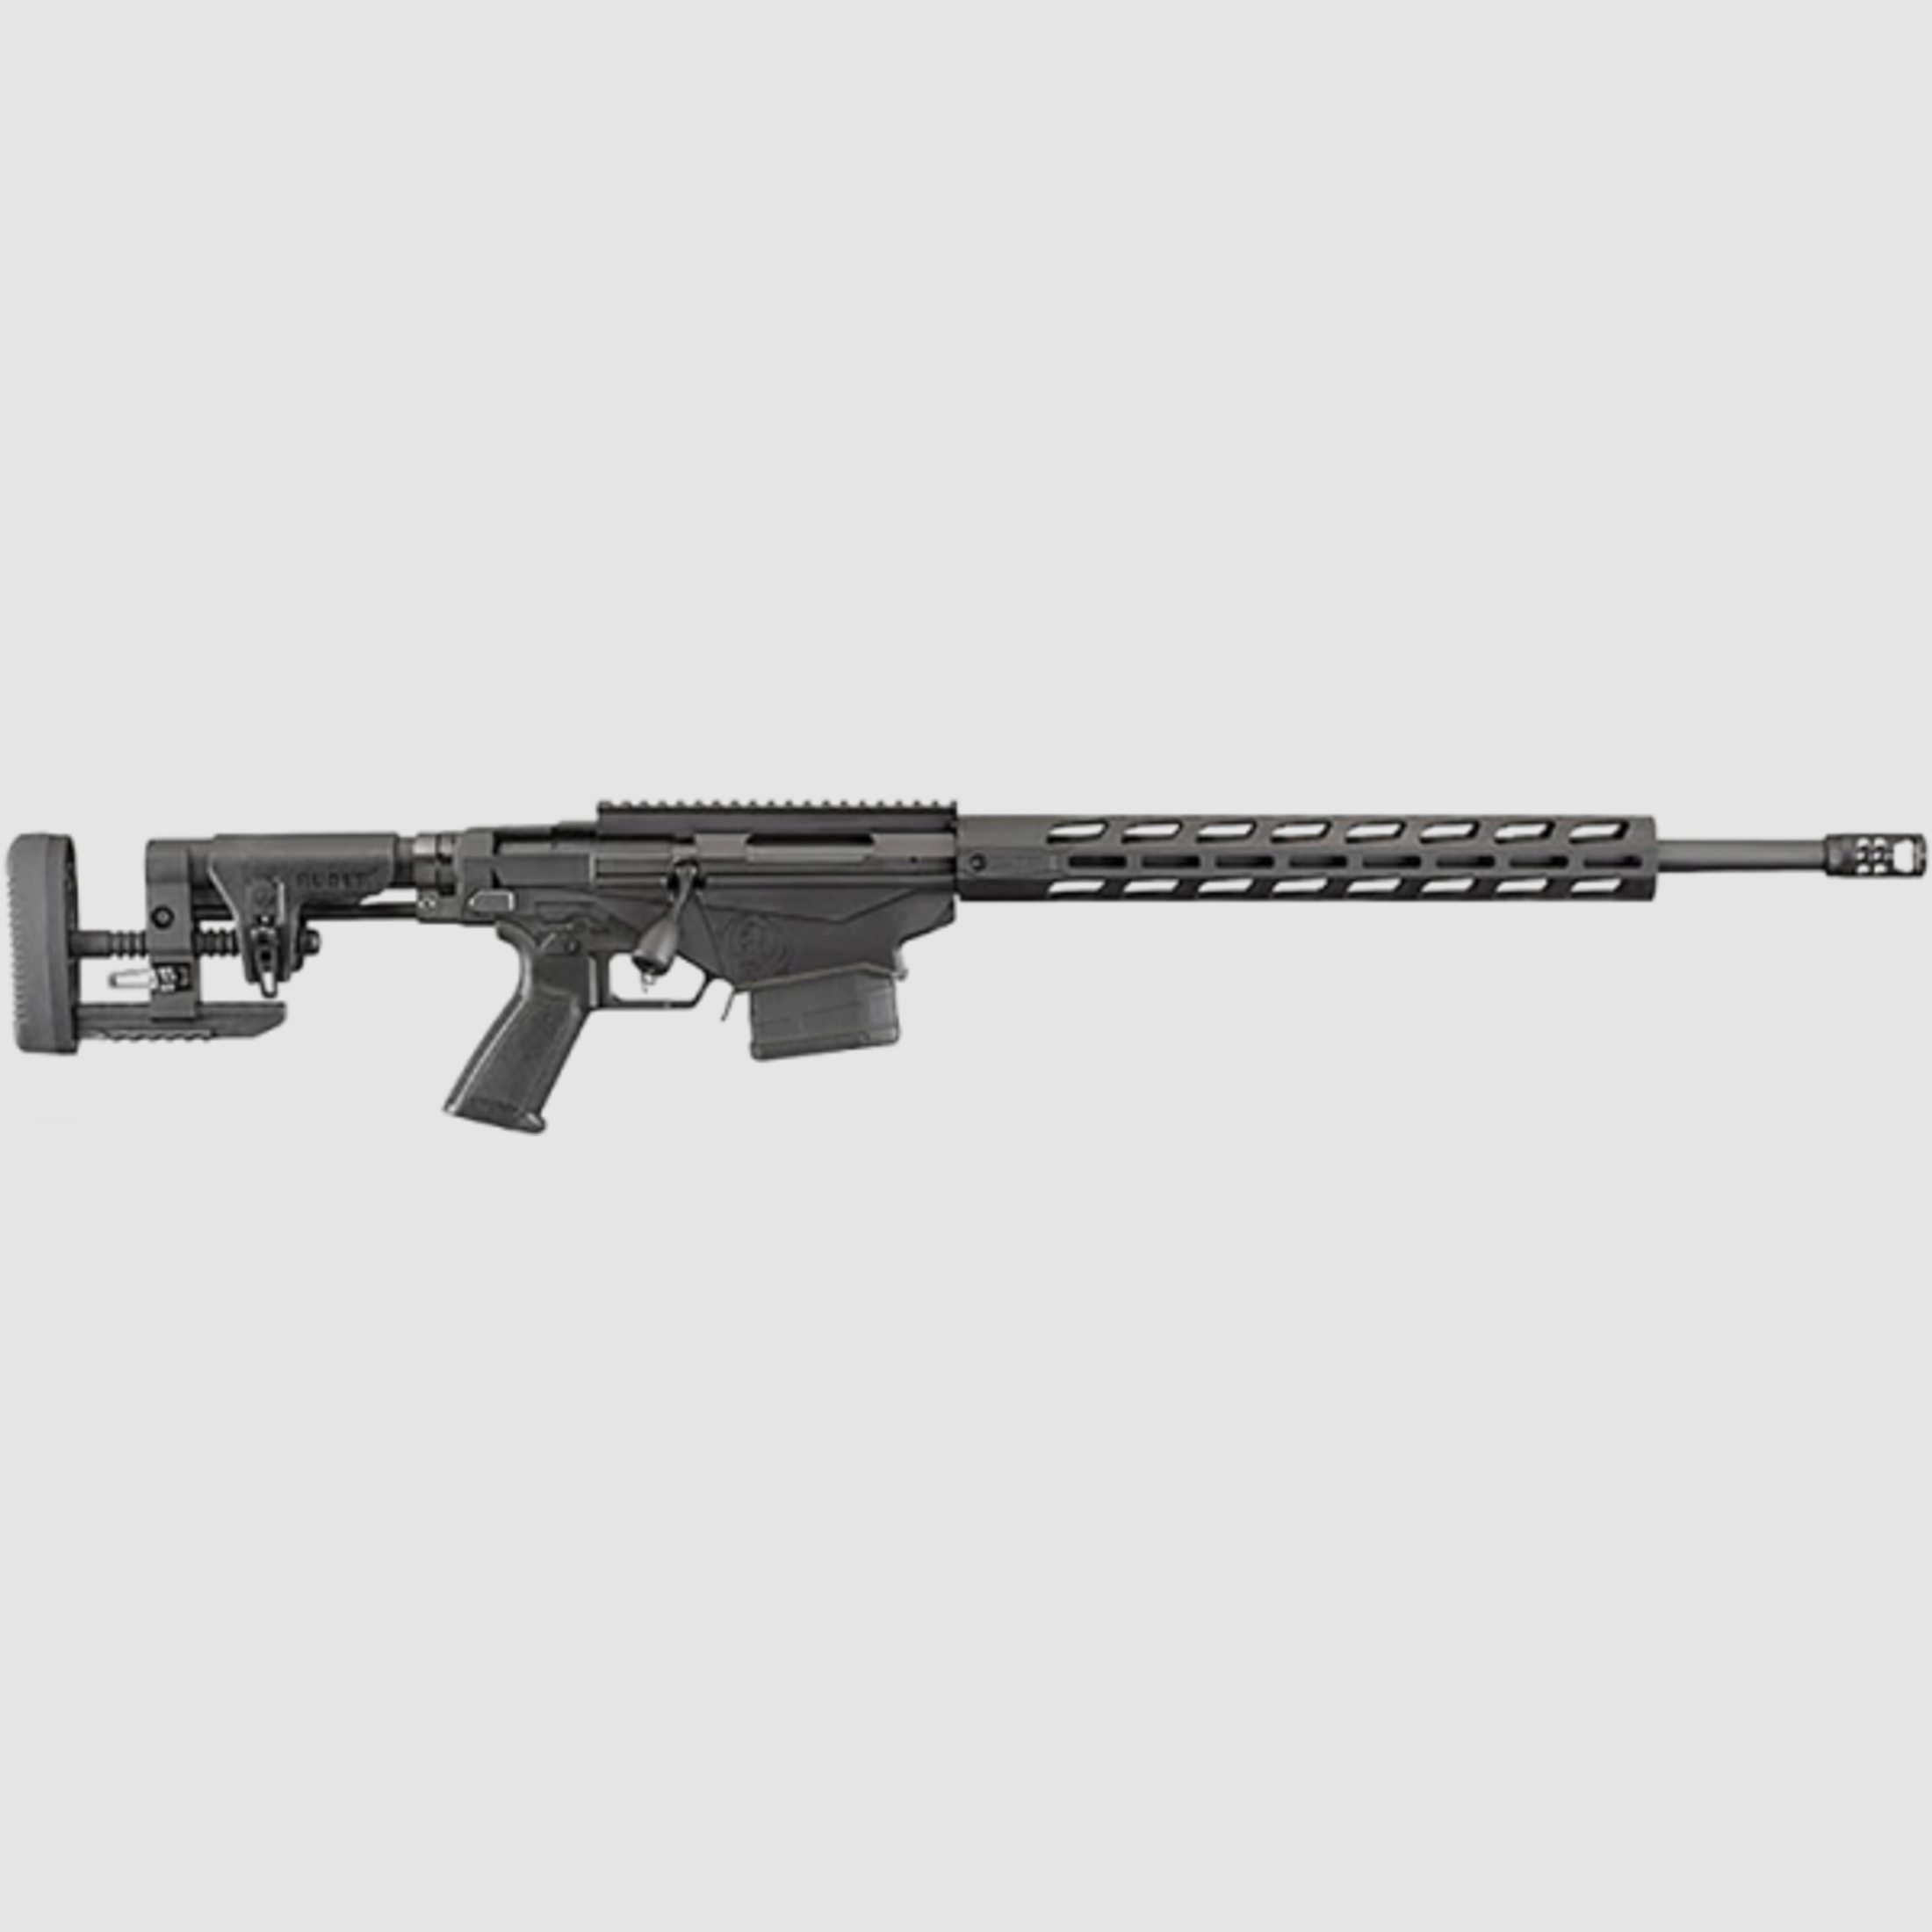 Ruger Precision Rifle Generation 3 Repetierbüchse